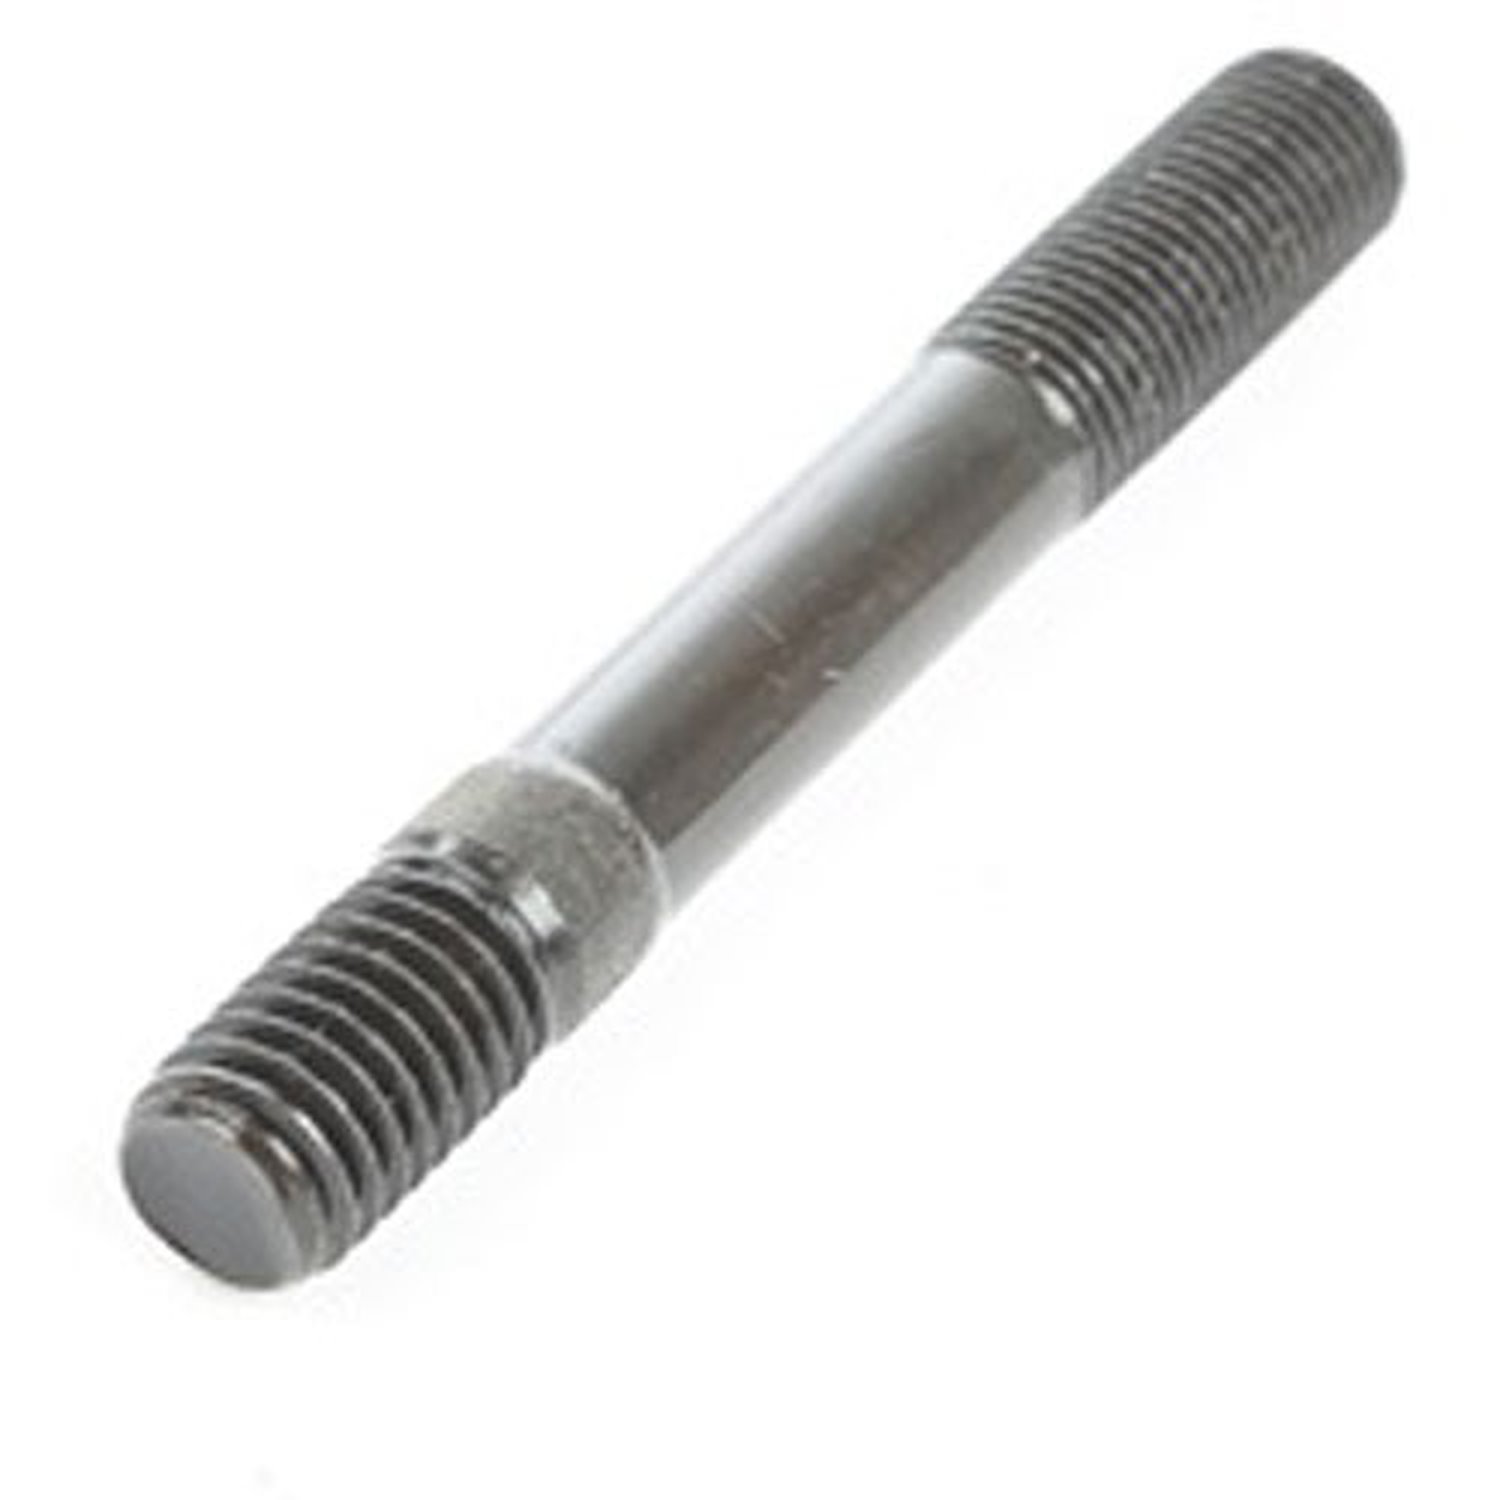 This Grade 8 cylinder head stud fits 134 cubic inch L-head engines. 15 required per engine.